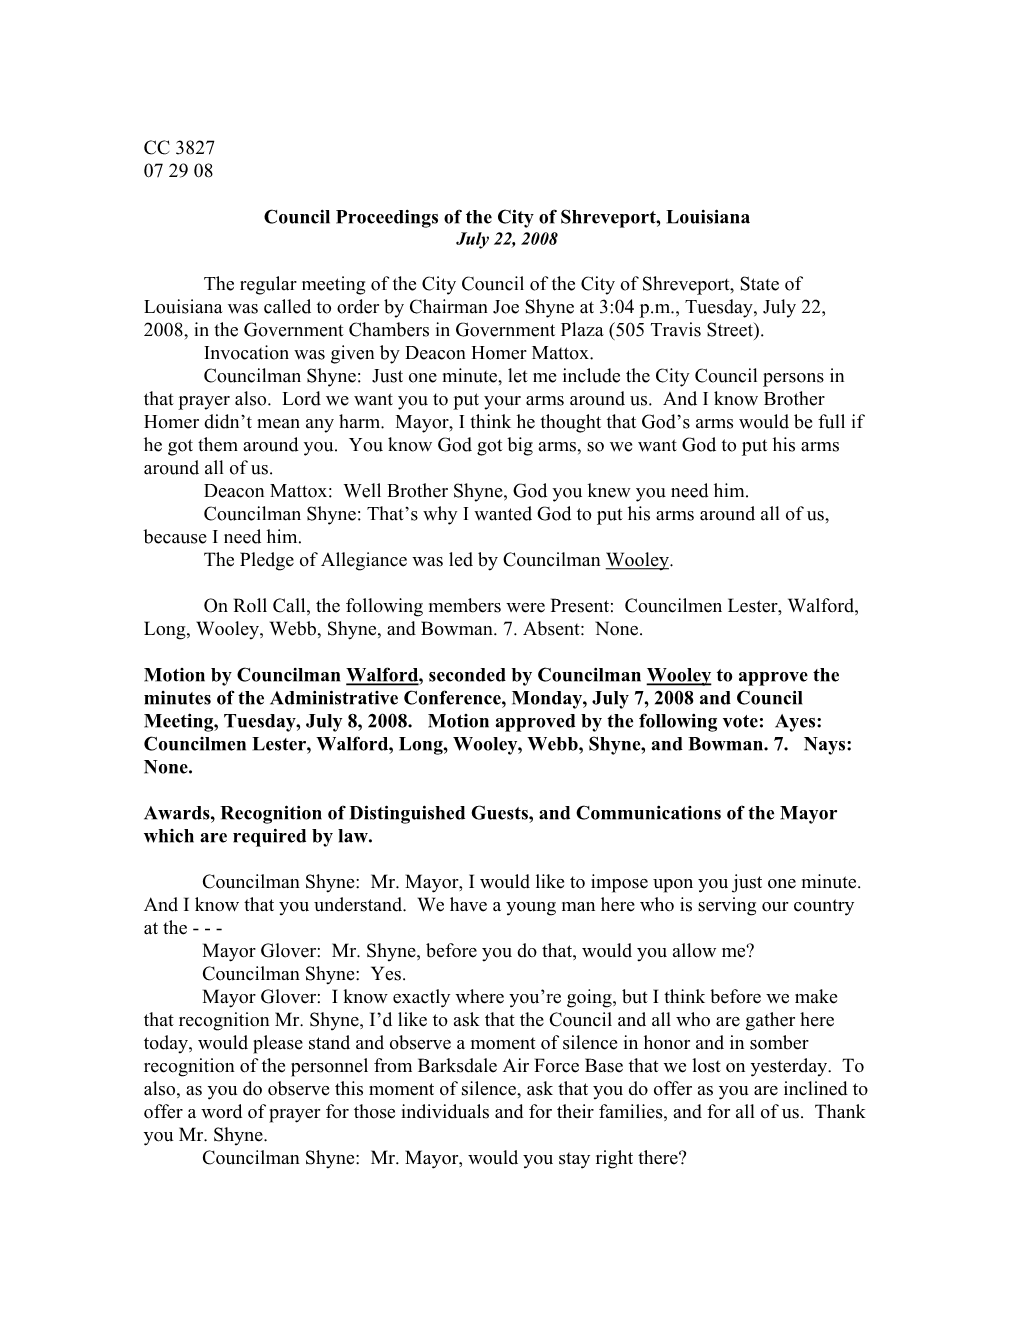 CC 3827 07 29 08 Council Proceedings of the City Of